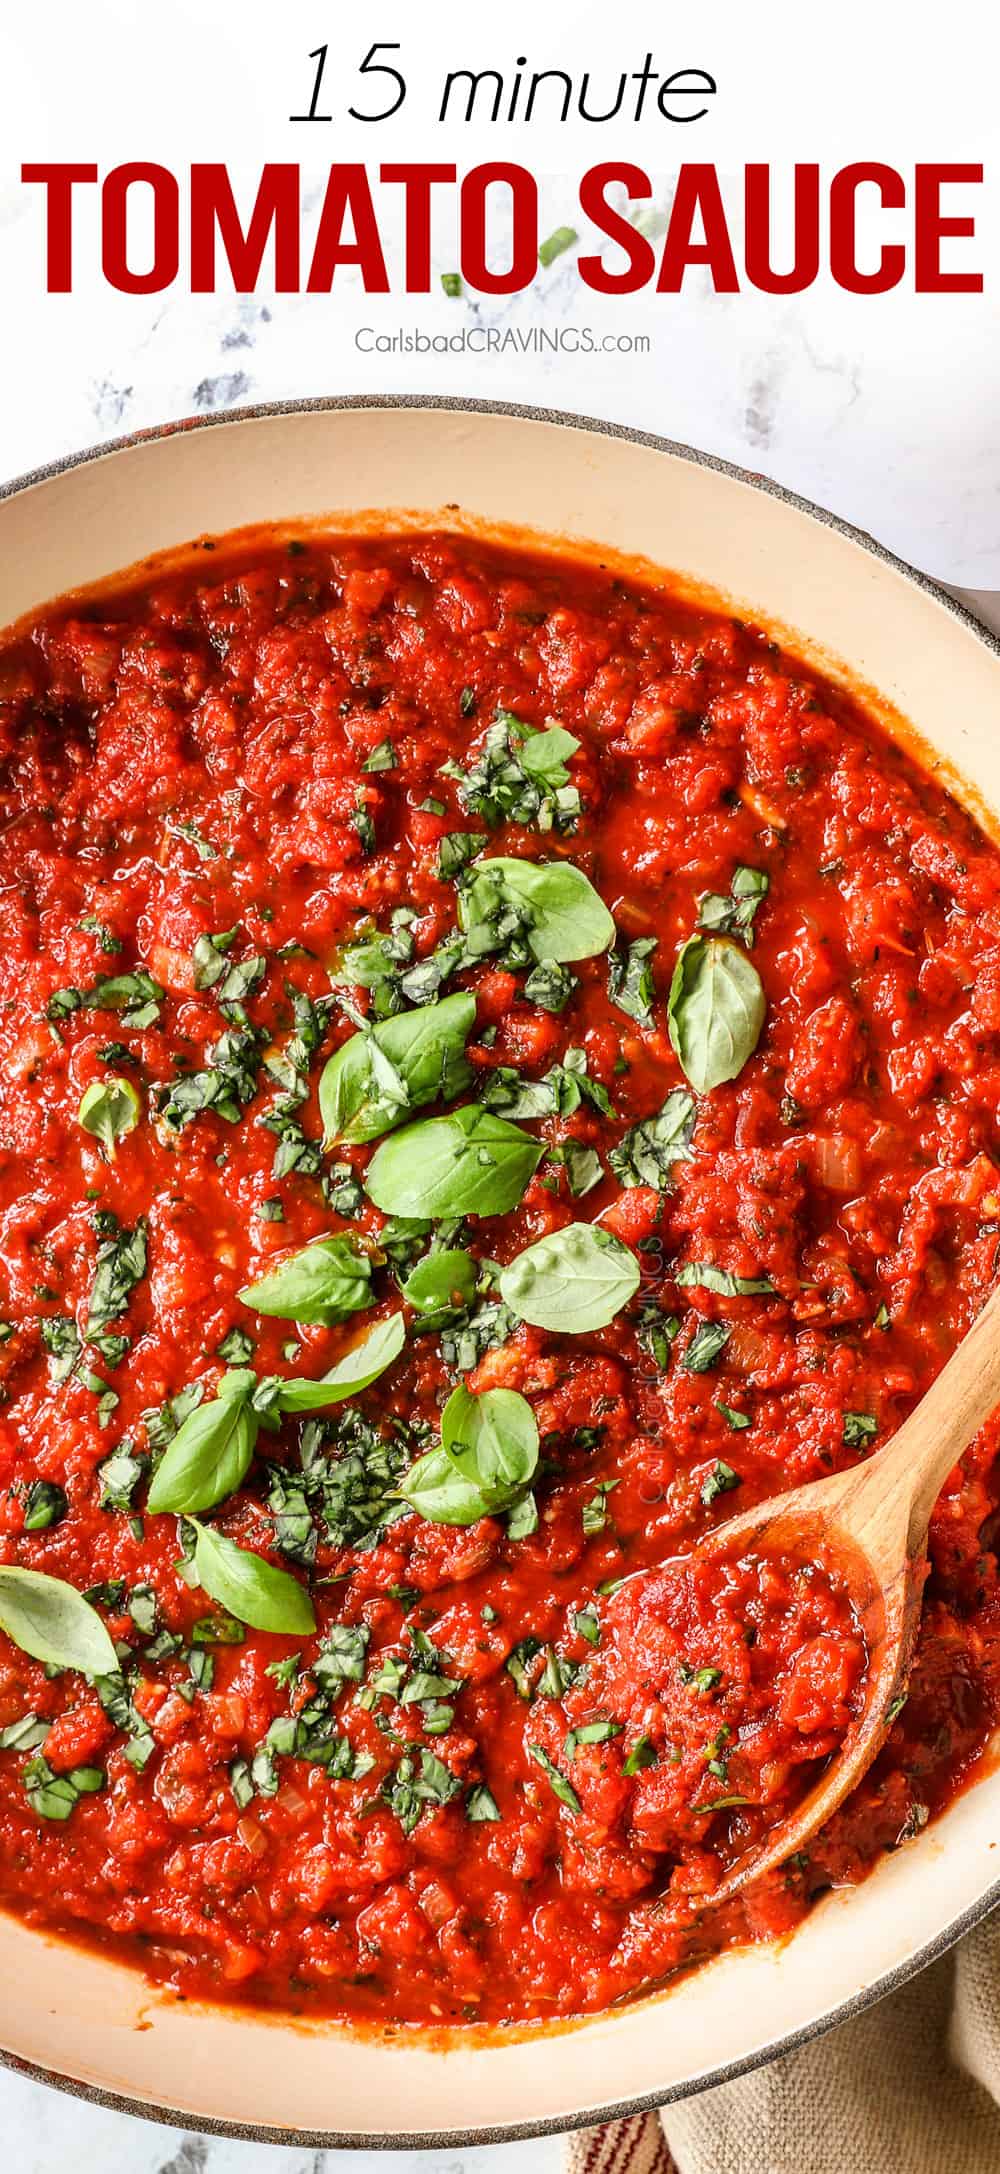 top view of tomato sauce recipe garnished by basil